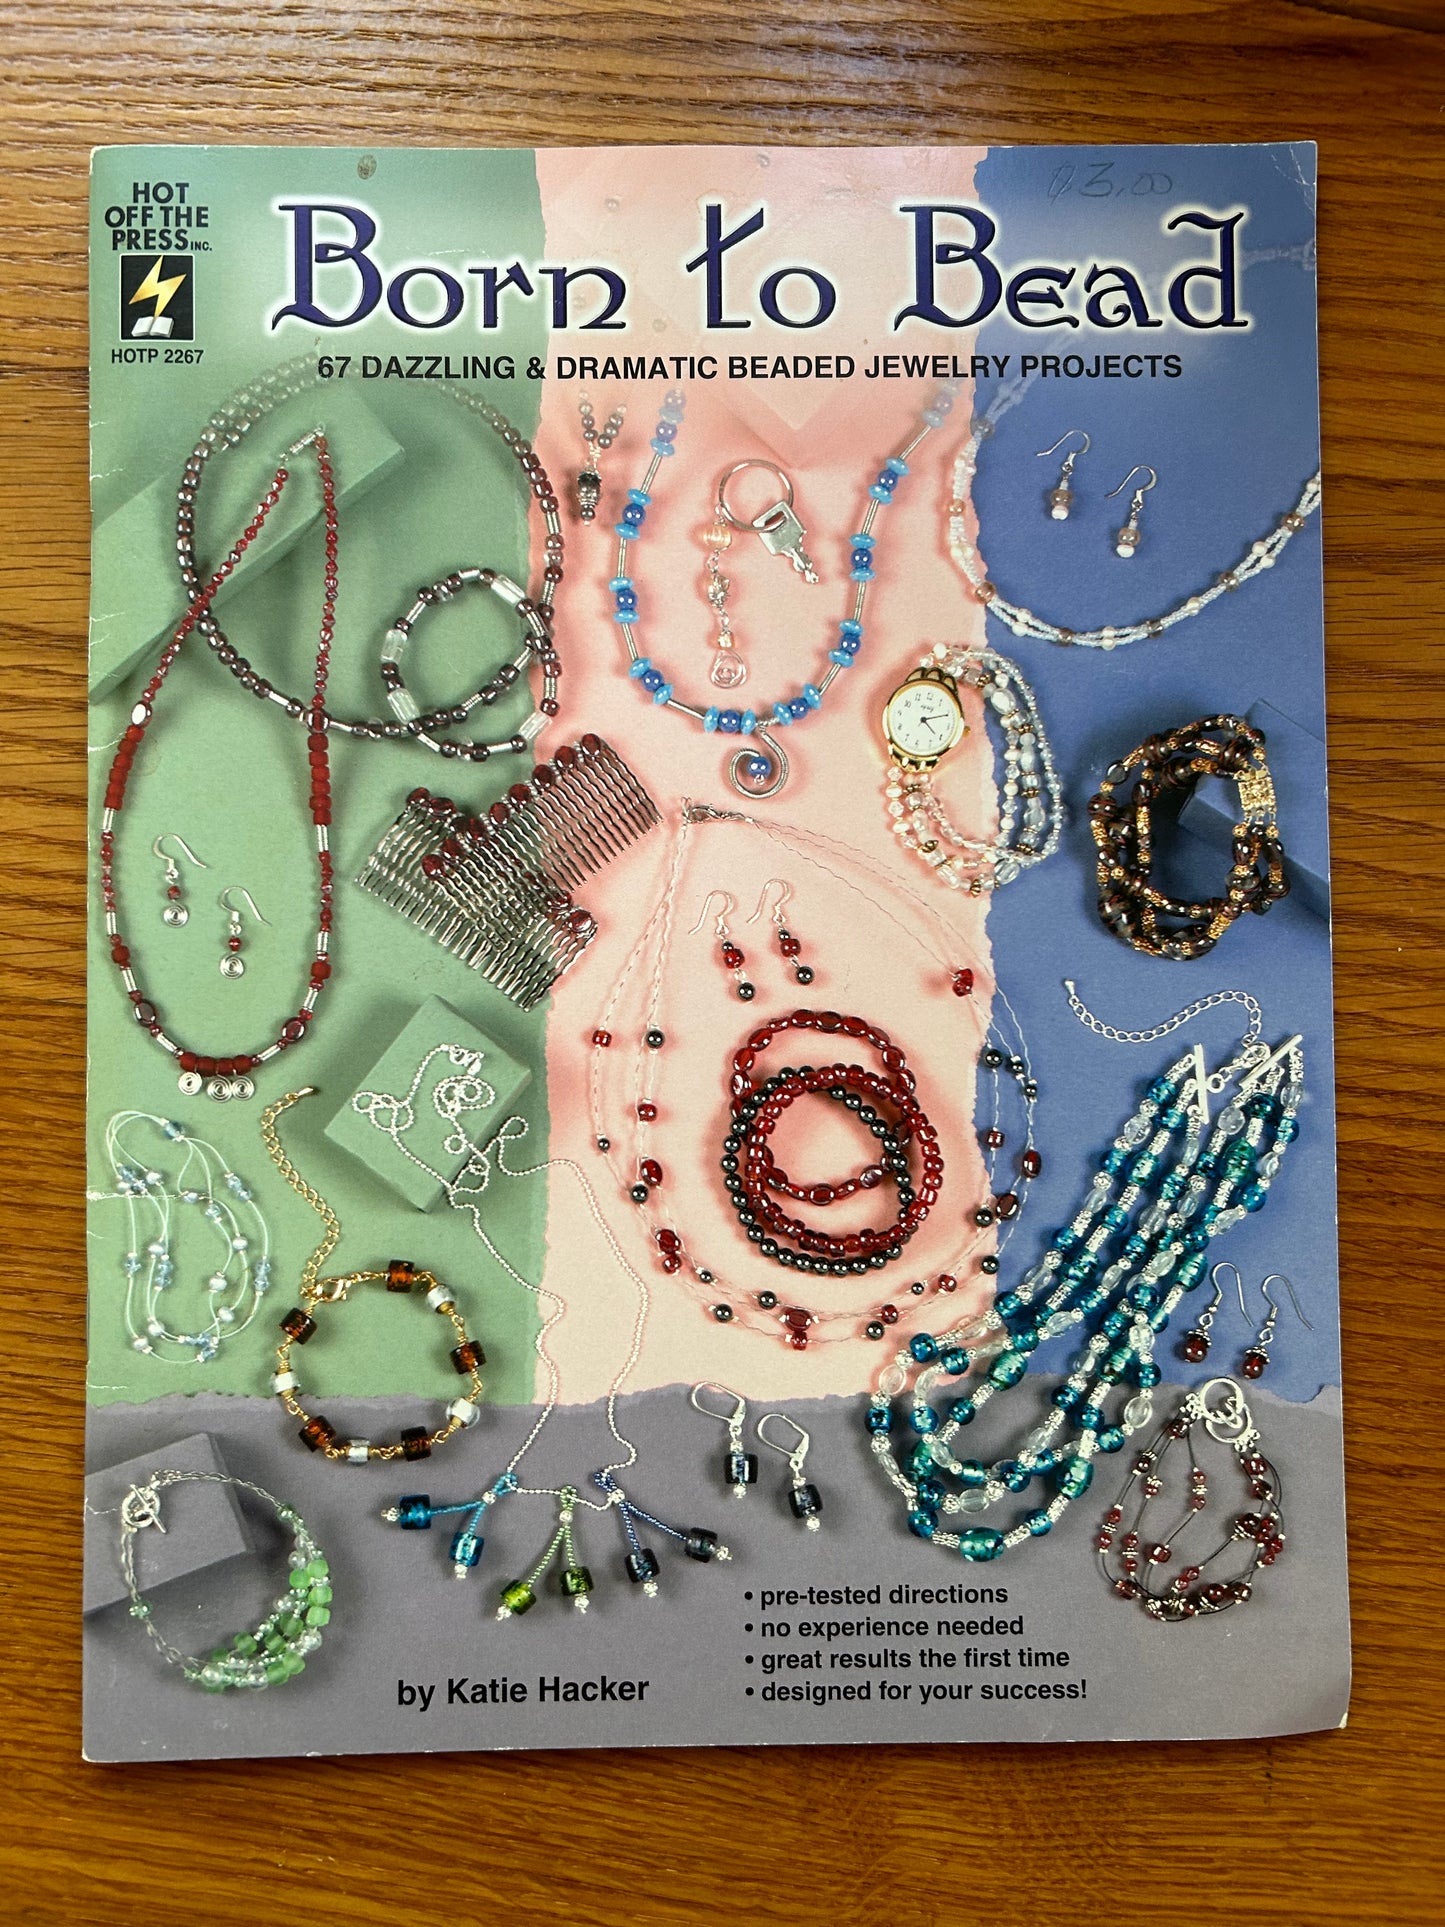 Born to Bead: 67 Dazzling & Dramatic Beaded Jewelry Projects